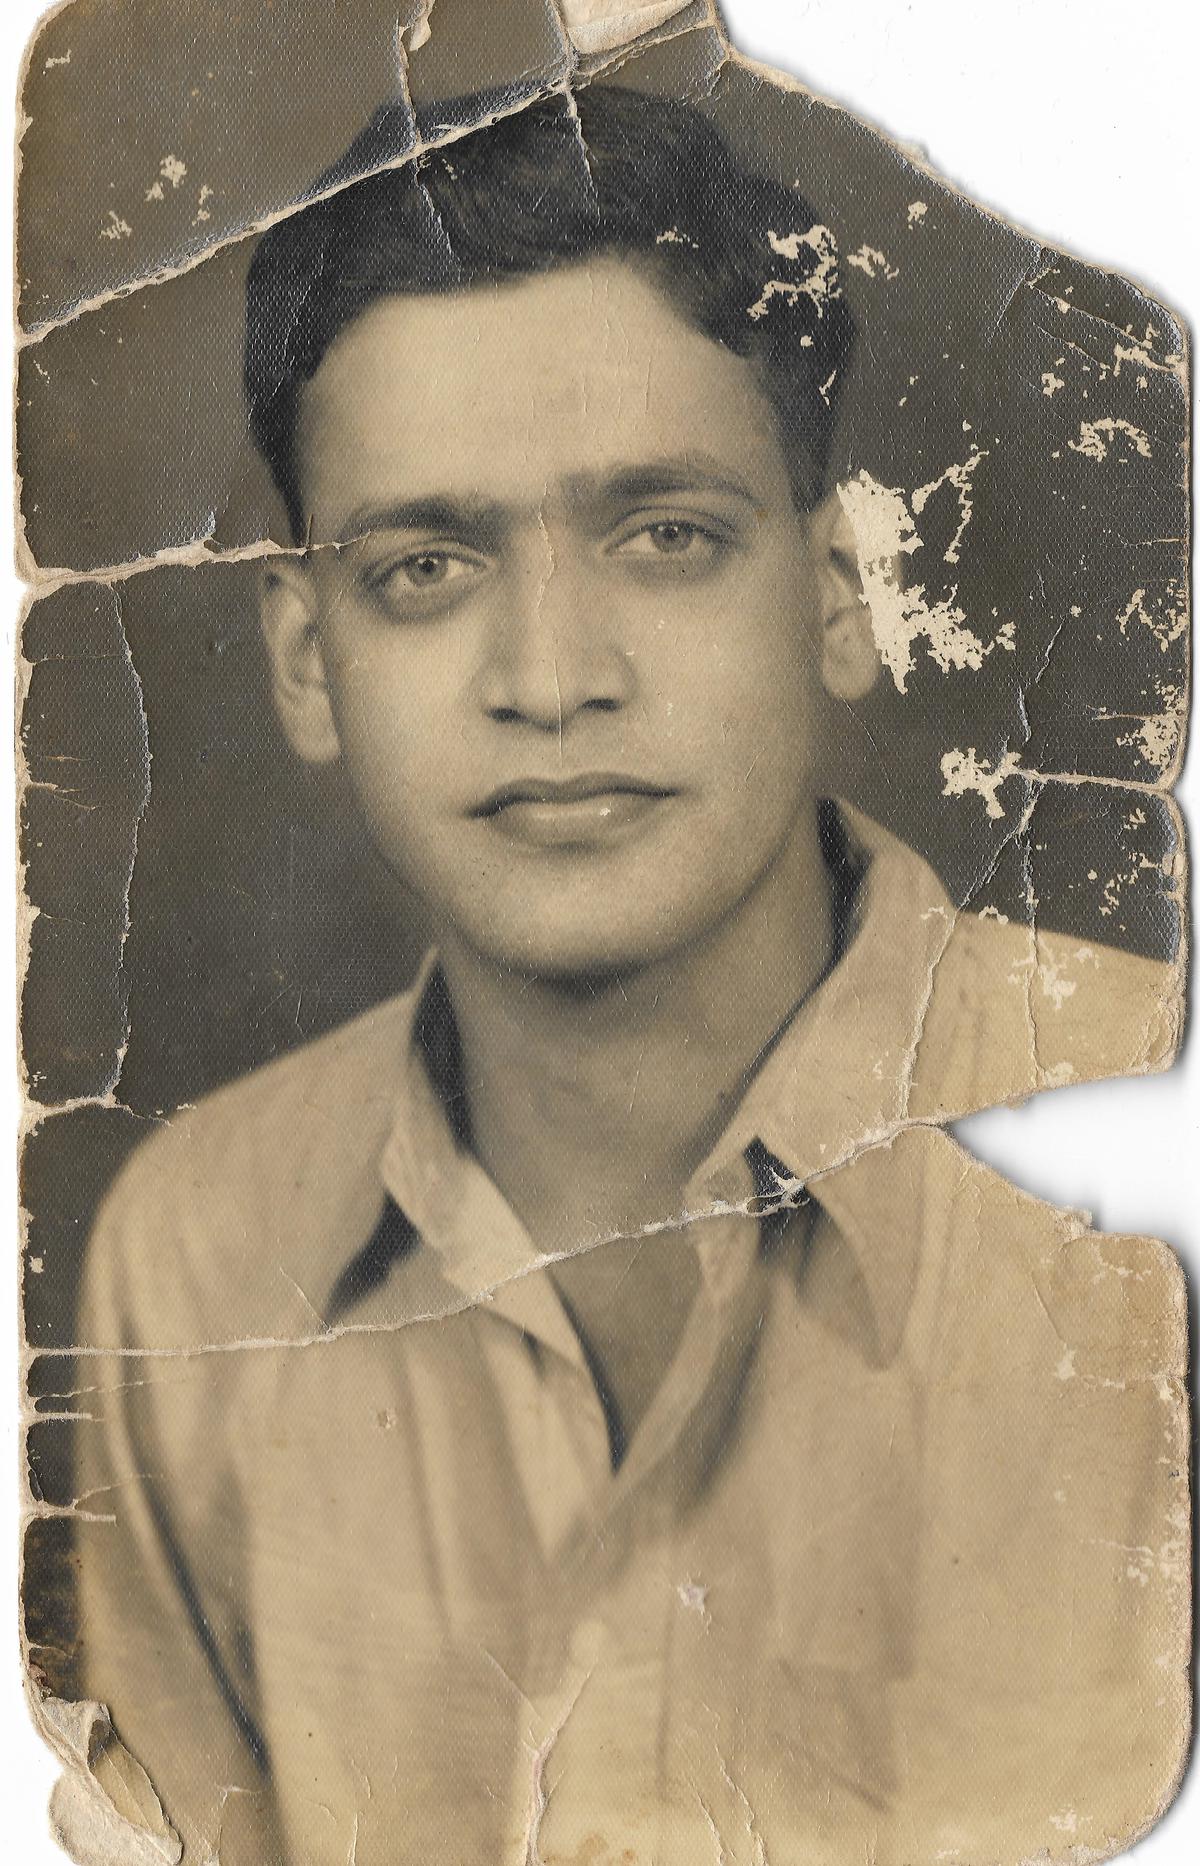 Air Marshal P V Iyer in his youth